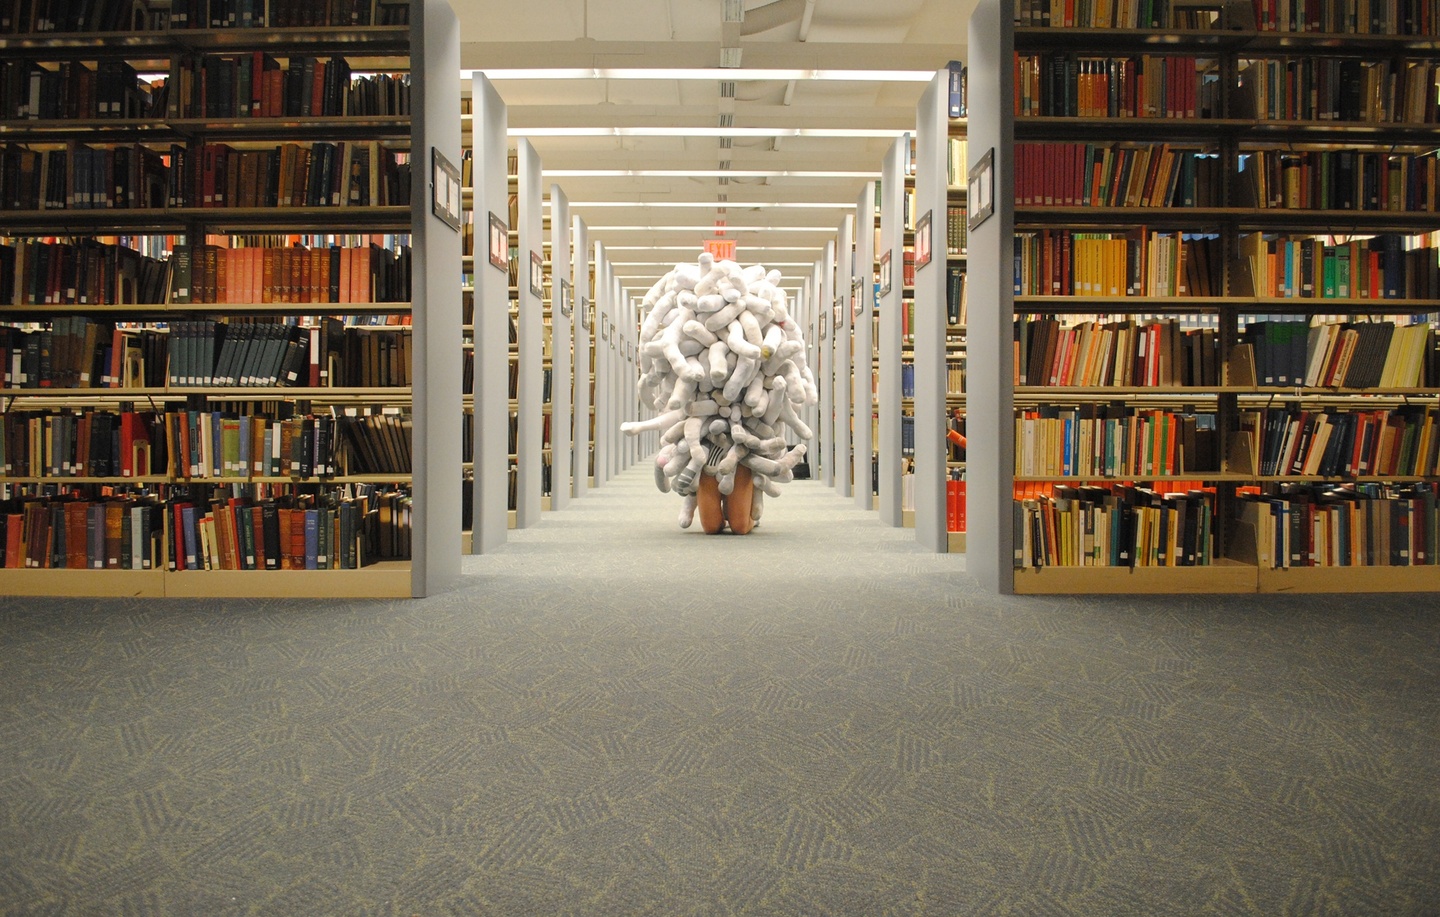 Person wearing a costume of white plush tubes covering their entire torso kneels on the floor between the stacks in a library.